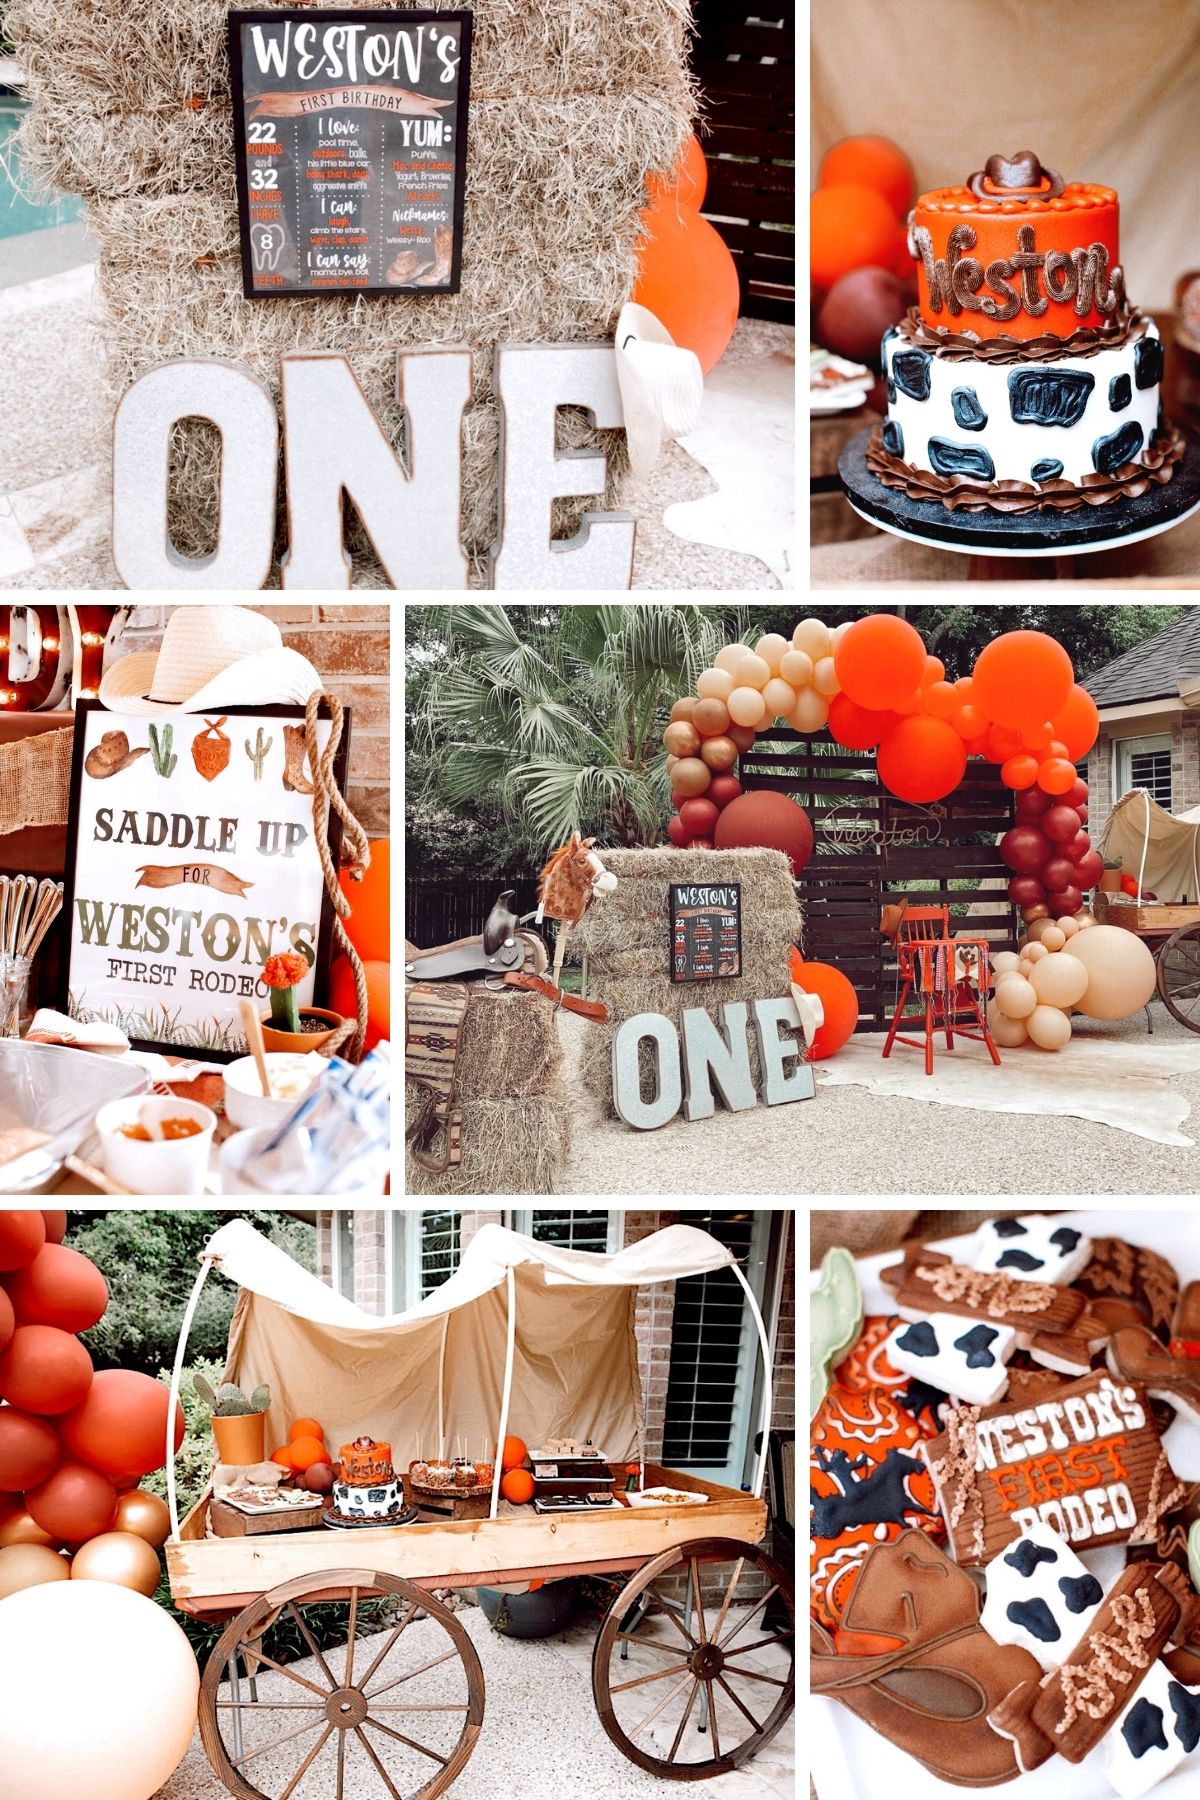 Photo collage of first rodeo party theme including cakes, party signs, and cookies.